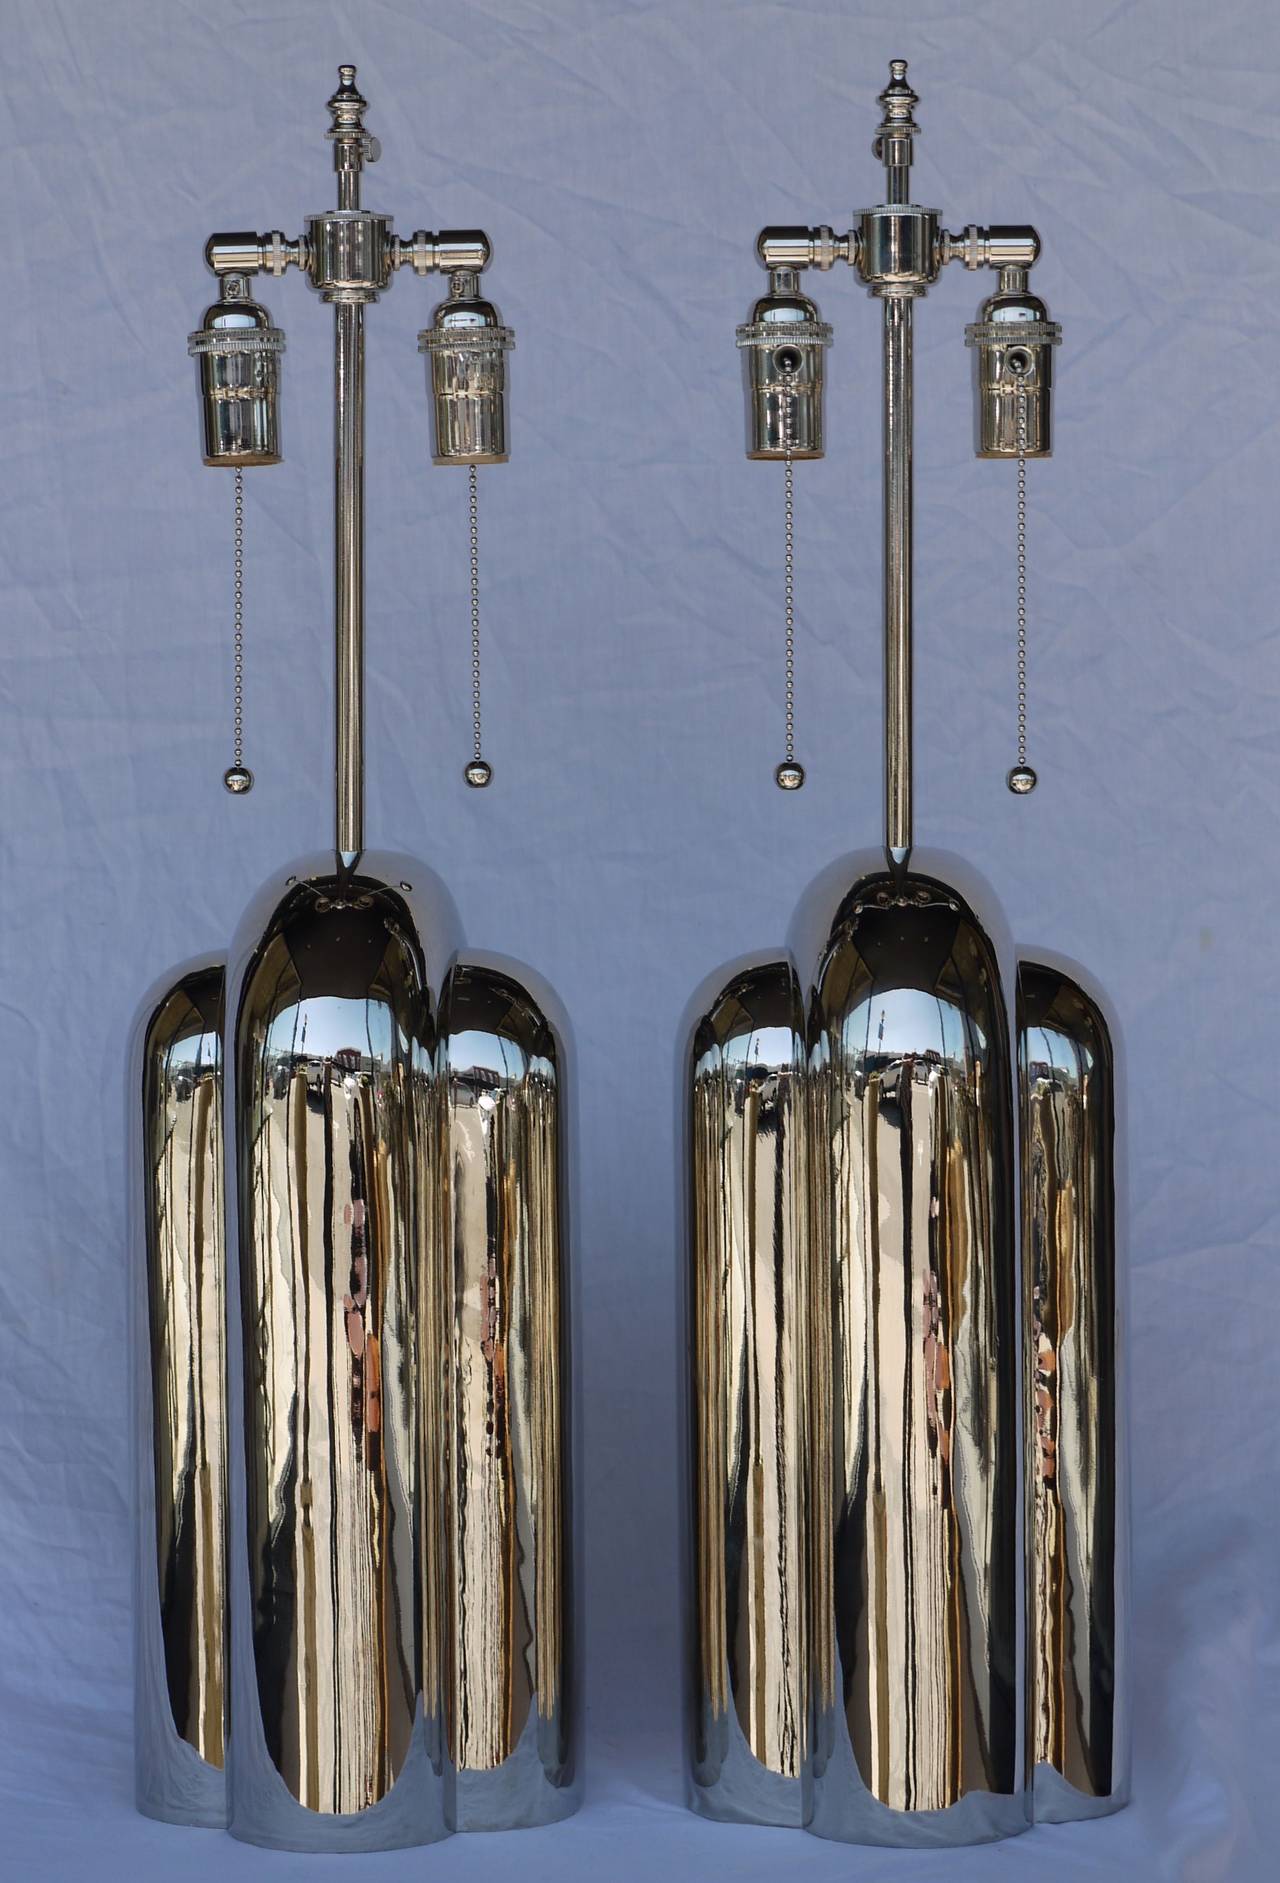 Absolutely stunning polished nickel deco revival lamps by Westwood Industries. Stunning classic shape and updated nickel hardware.